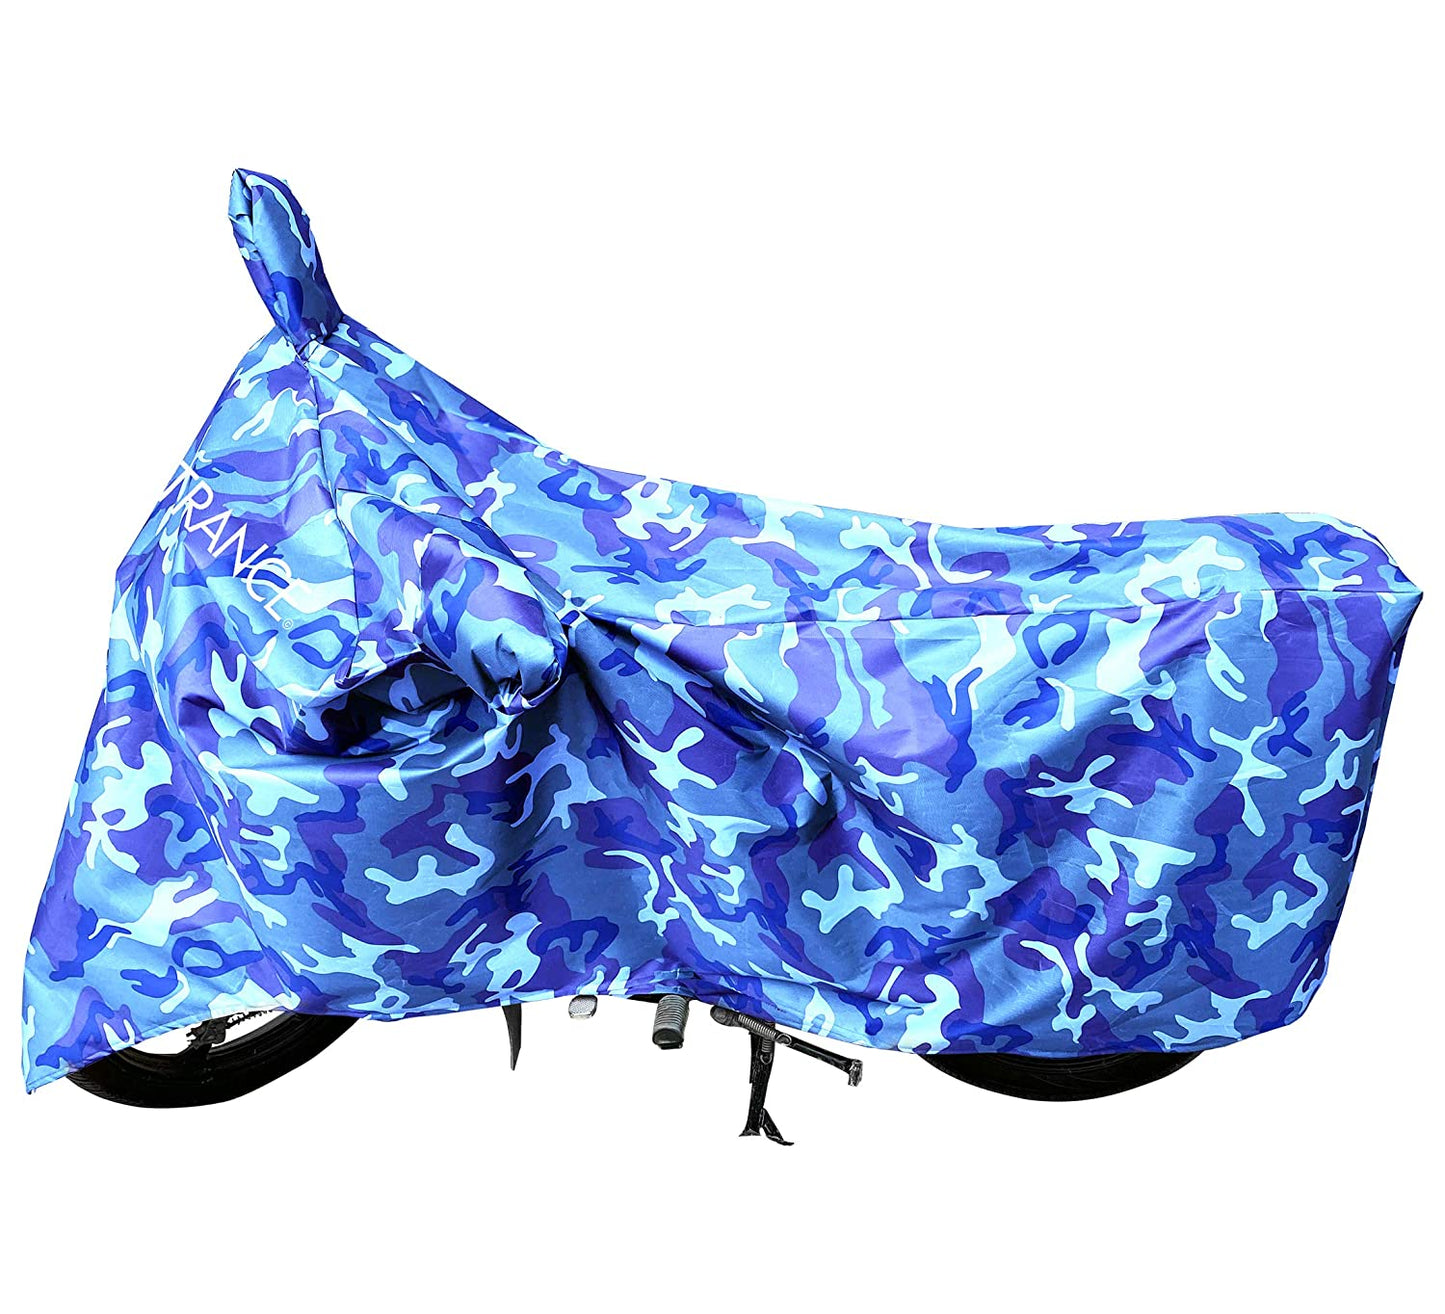 MotoTrance Jungle Bike Body Covers For Kinetic Boss - Interlock-Stitched Waterproof and Heat Resistant with Mirror Pockets